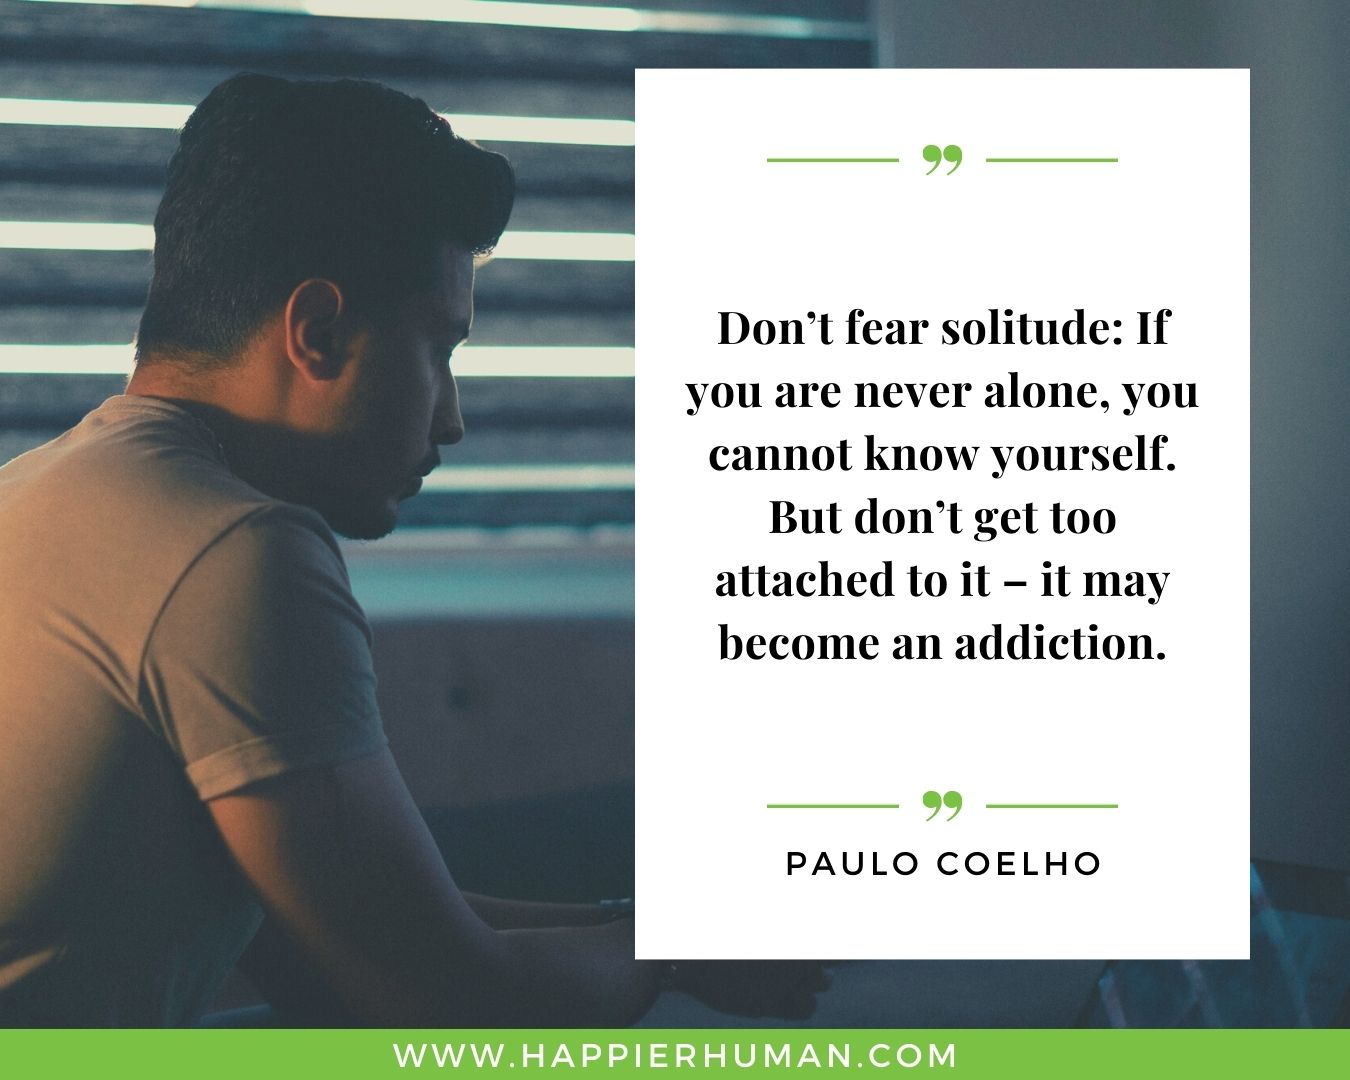 Loneliness Quotes - “Don’t fear solitude: If you are never alone, you cannot know yourself. But don’t get too attached to it – it may become an addiction.” – Paulo Coelho